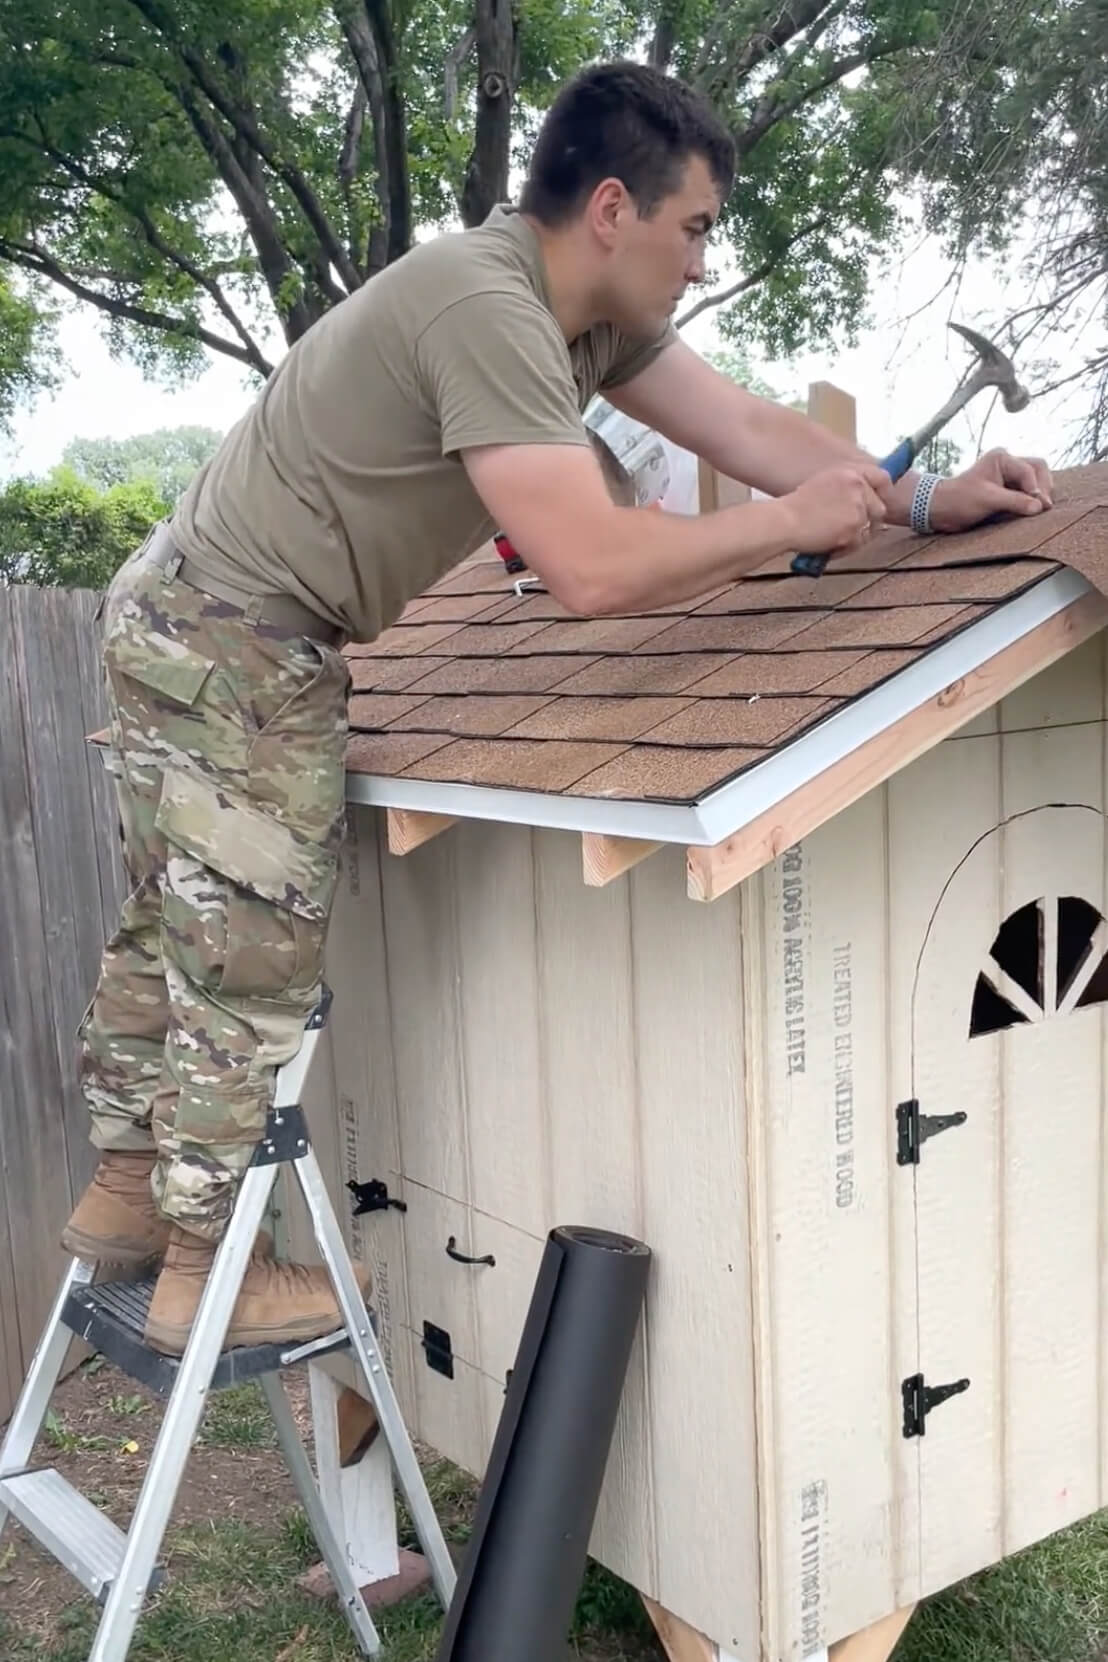 Adding roofing to our backyard chicken coop.